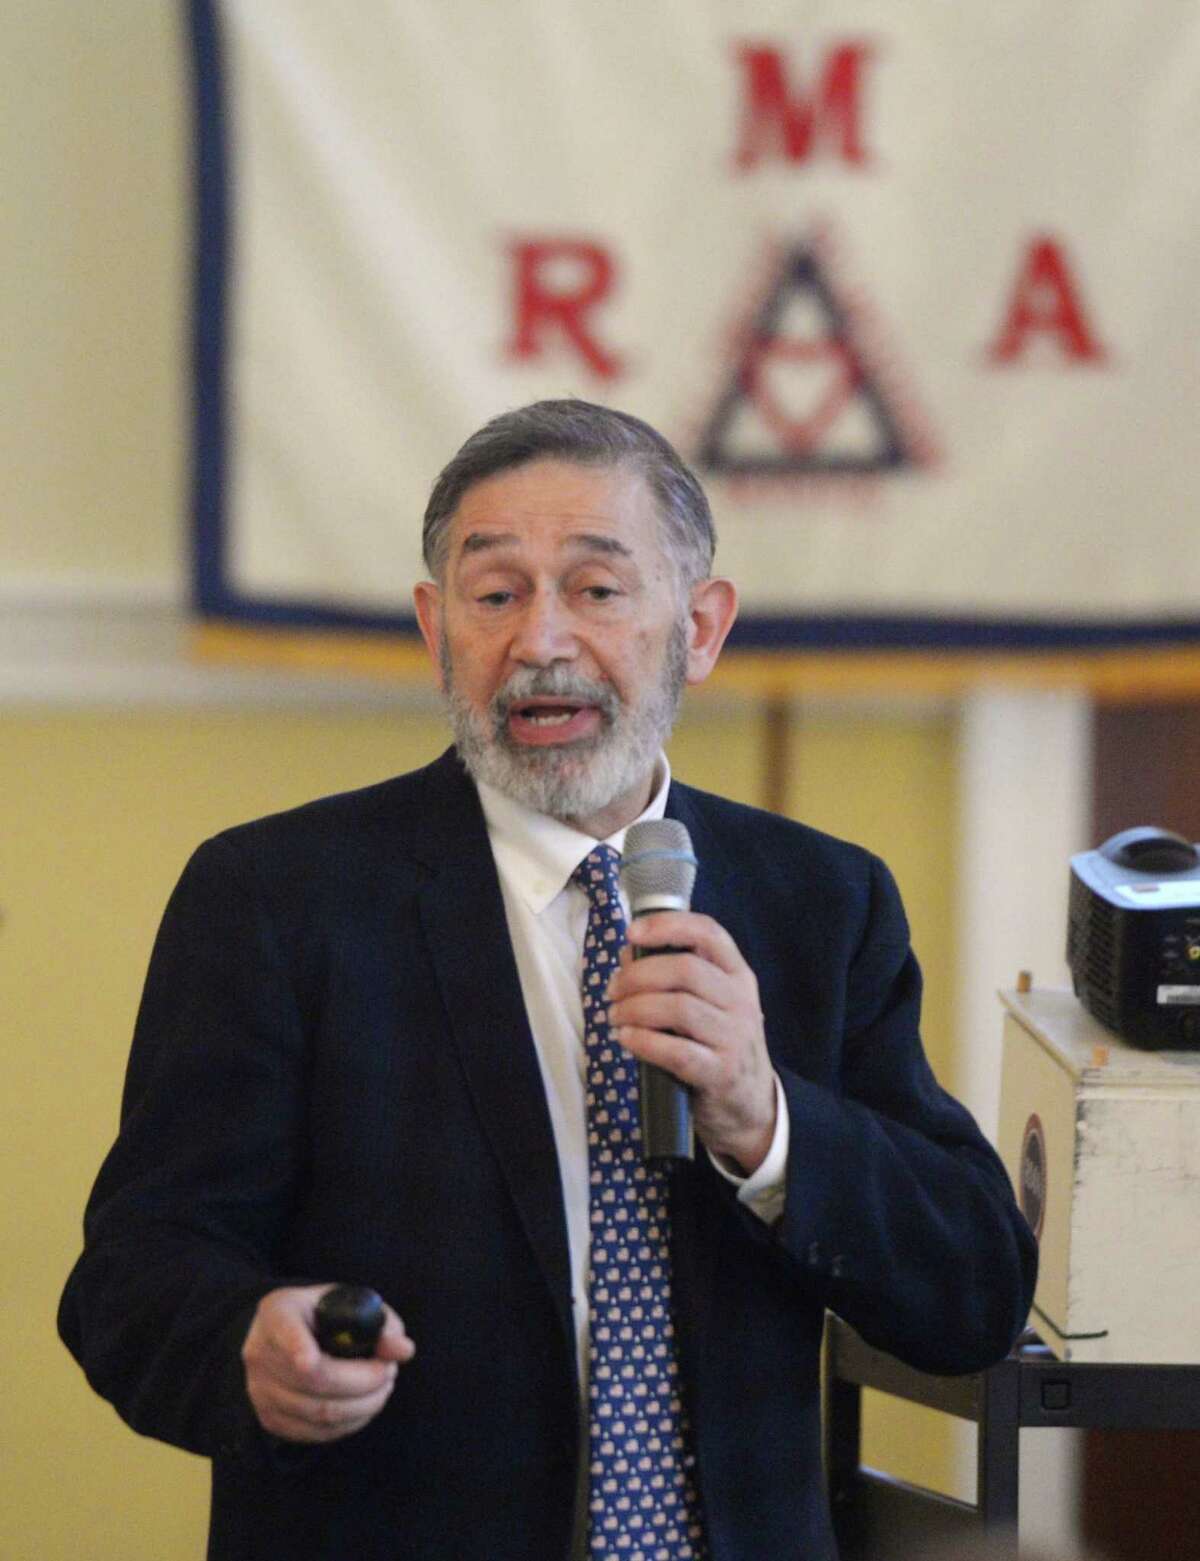 Interim Superintendent of Schools Ralph Mayo speaks during the presentation of “How School is Different in the 21st Century" as part the Retired Men's Association's weekly speaker series at First Presbyterian Church in Greenwich, Conn. Wednesday, Feb. 6, 2019.